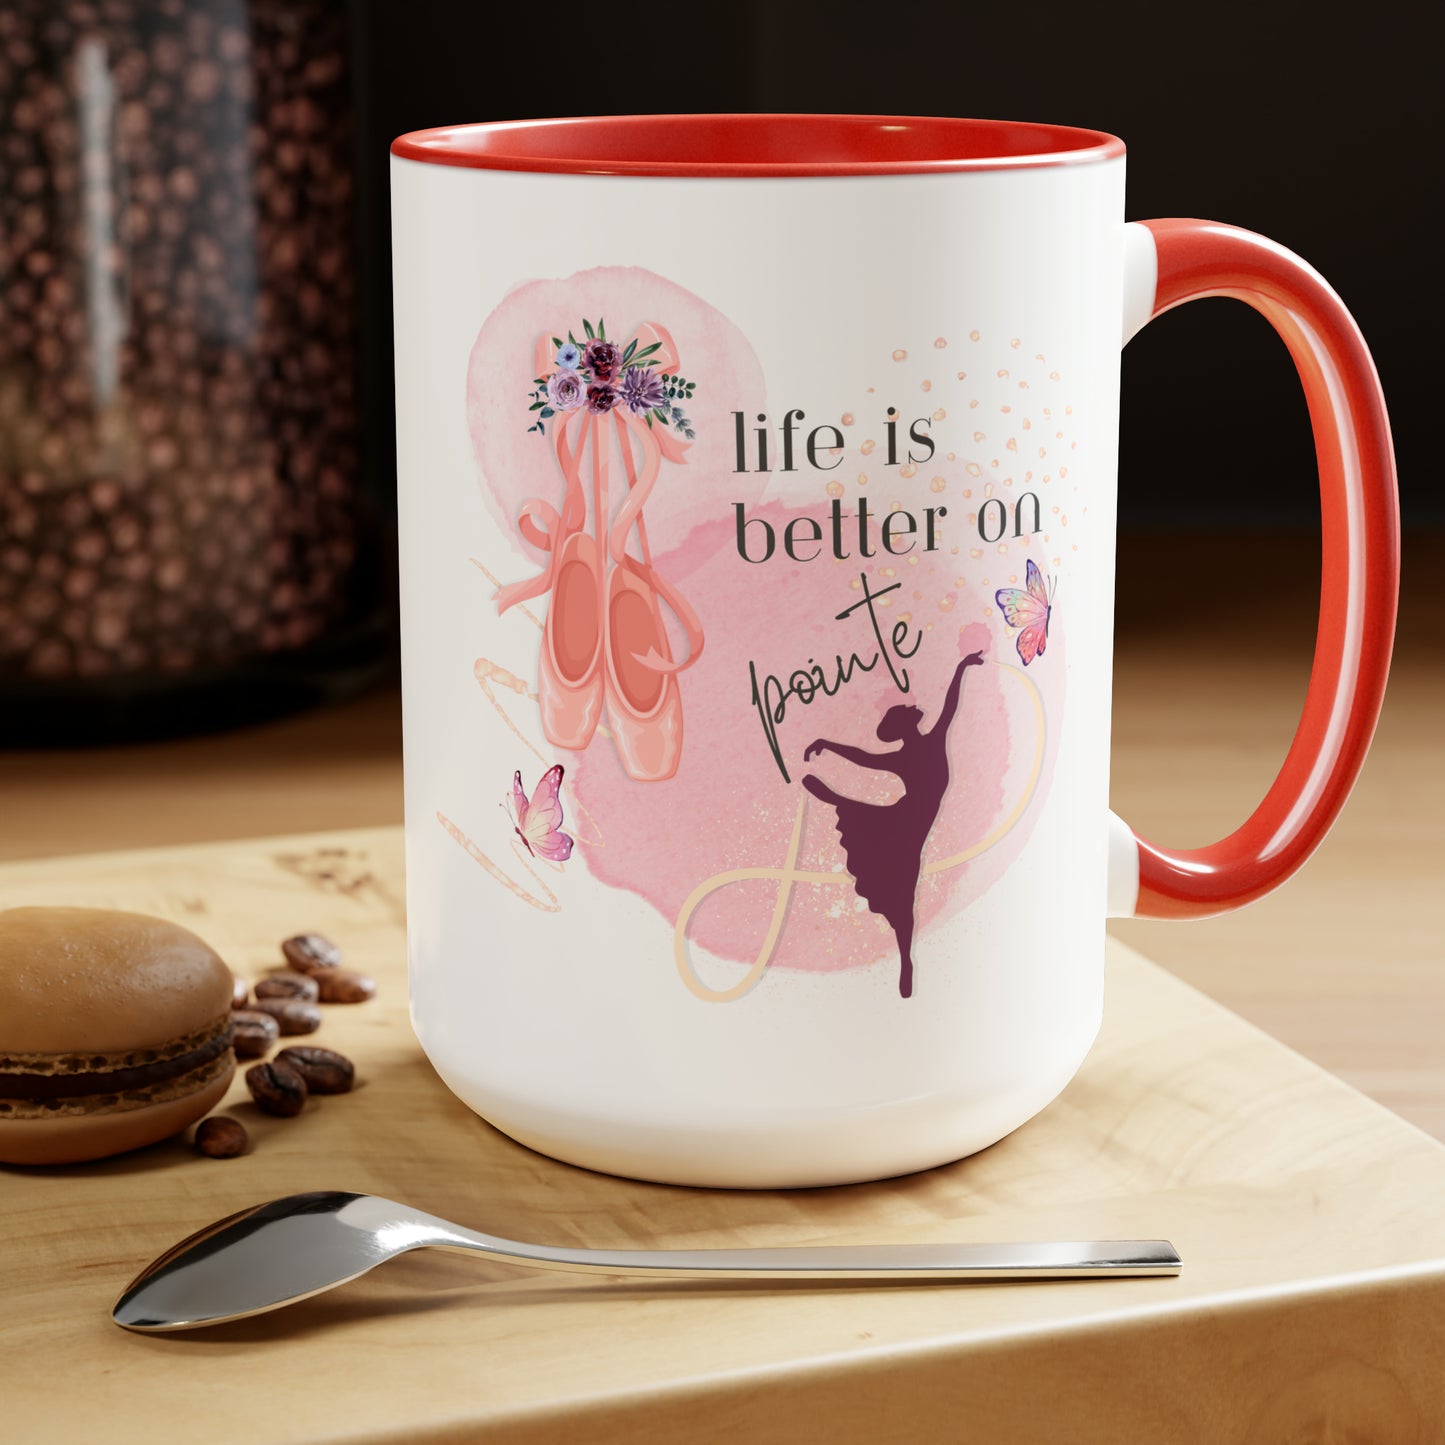 Two-Tone Coffee Mugs, 15oz - Ballerinas - Life is better on pointe- red rim